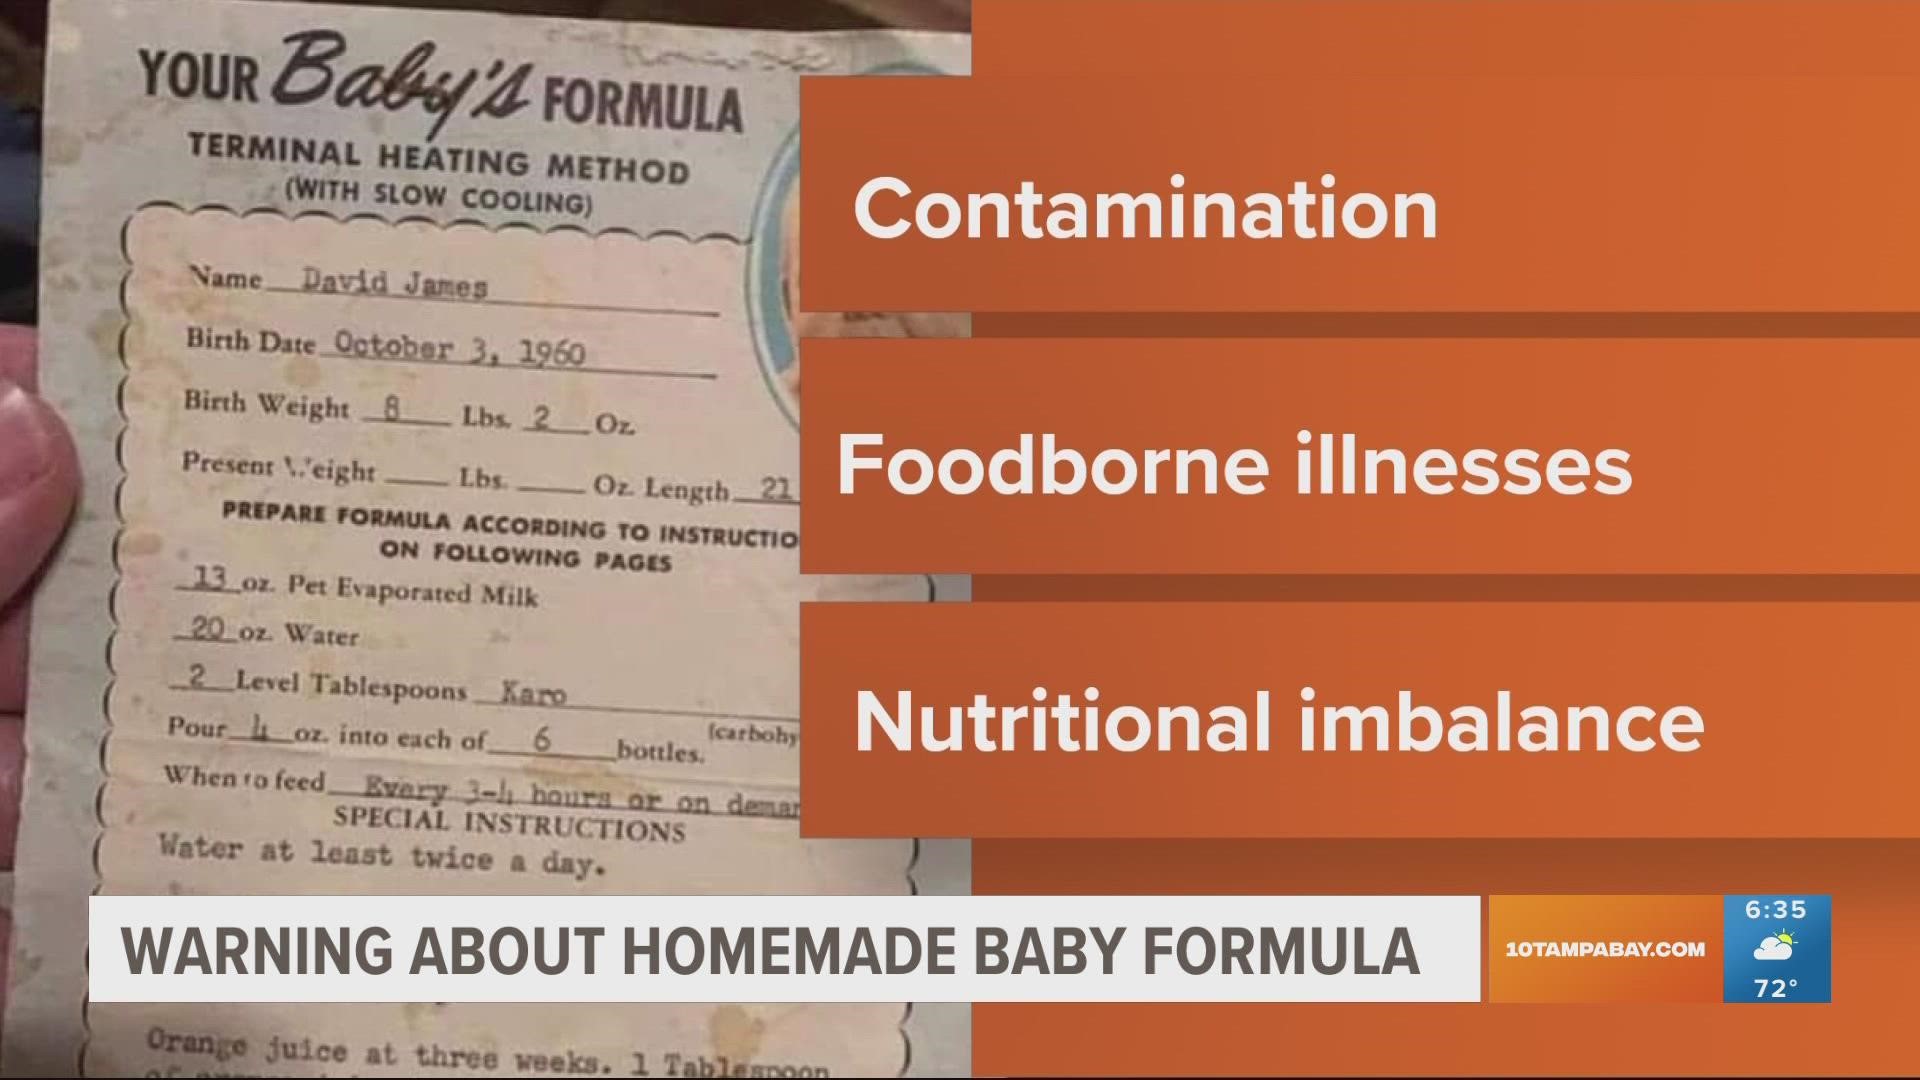 Health experts say homemade baby formula could be easily contaminated or contain nutritional imbalances.